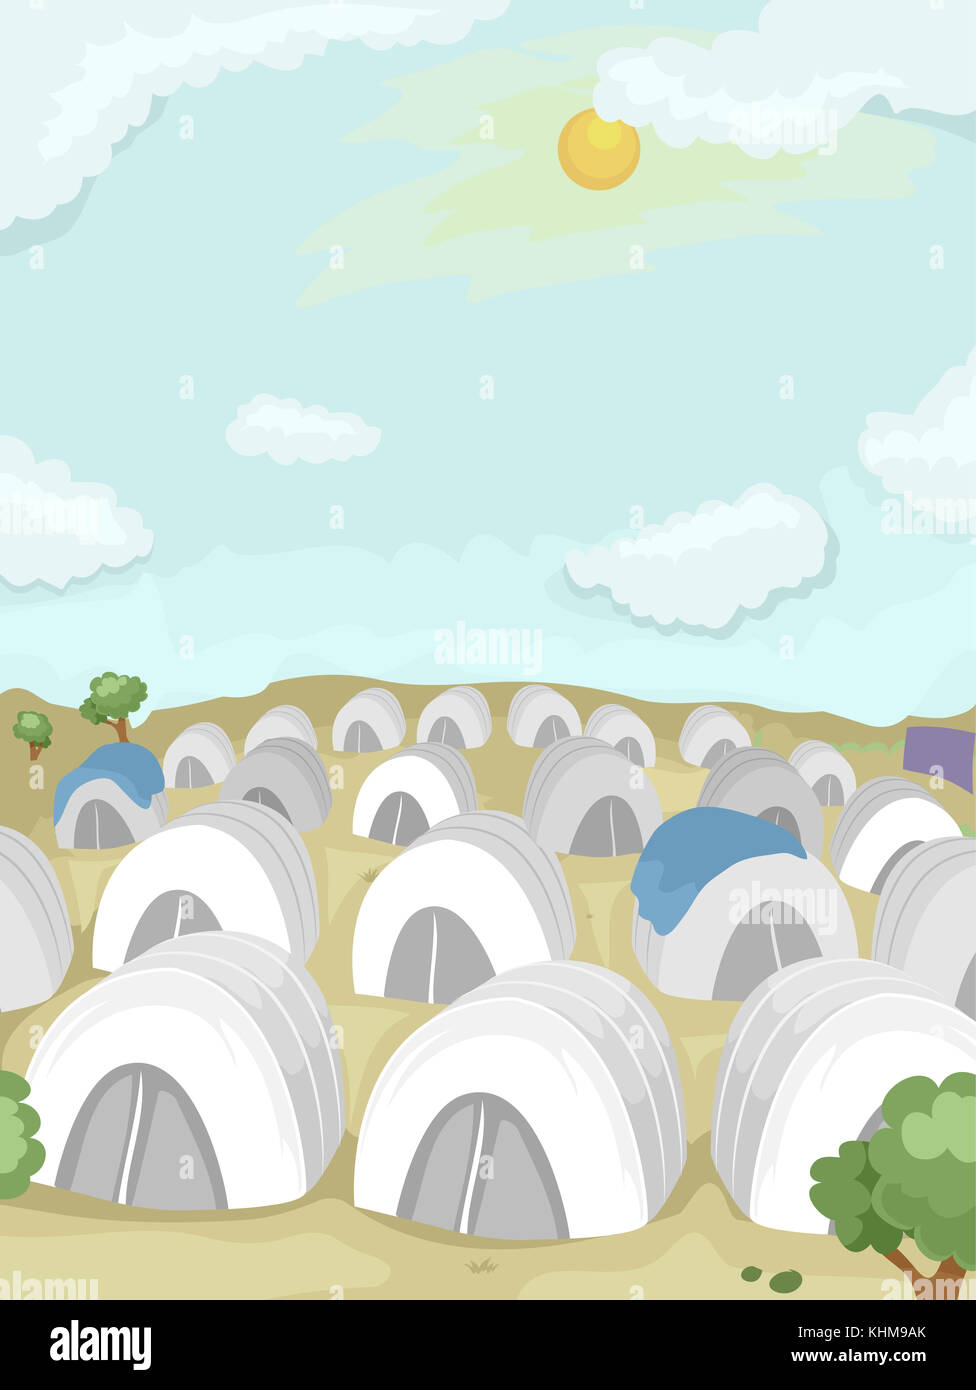 Illustration of a Refugee Camp in the Desert Populated With White Tents Stock Photo